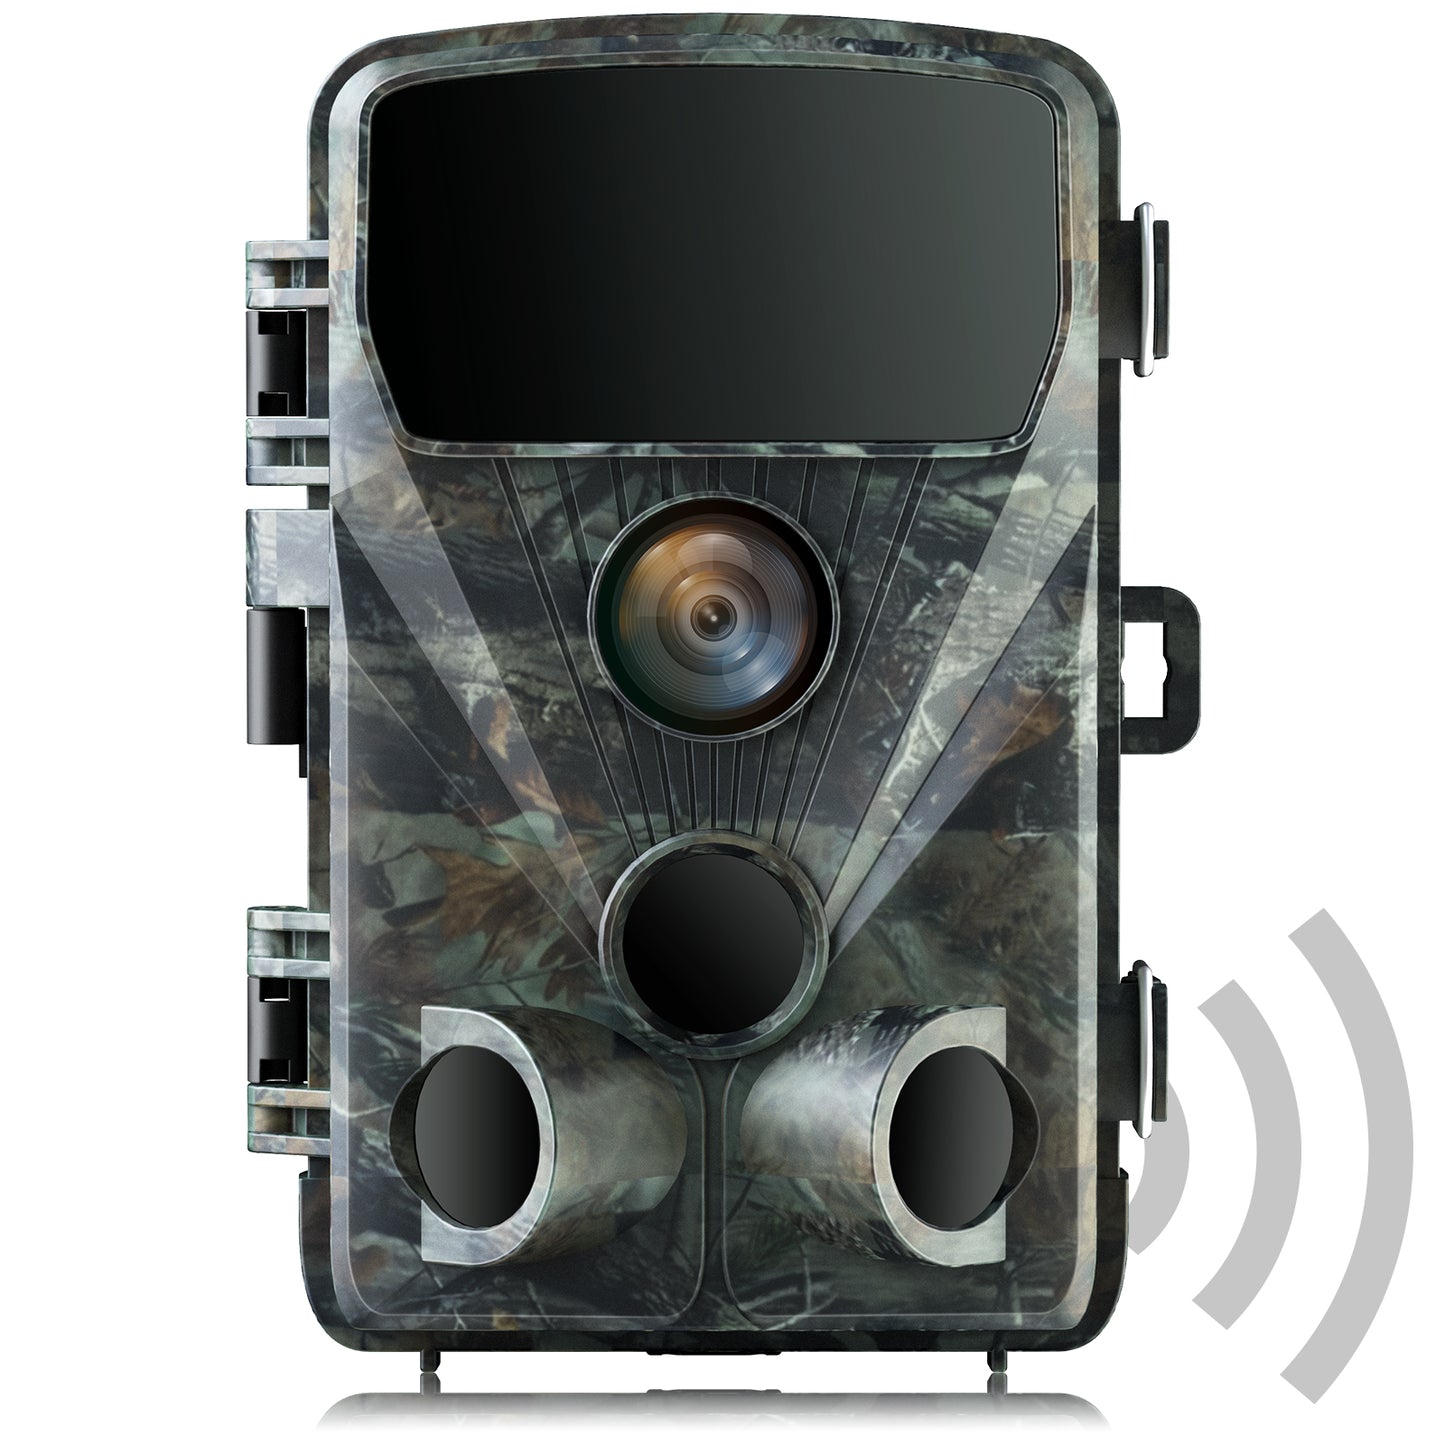 TOGUARD Native 4K 30fps WiFi Trail Camera 24MP Bluetooth Game Hunting Camera with 65FT Infrared Night Vision Motion Activated Waterproof 120° Wide Angle Wildlife Monitoring 2.4" LCD Deer Trail Cam